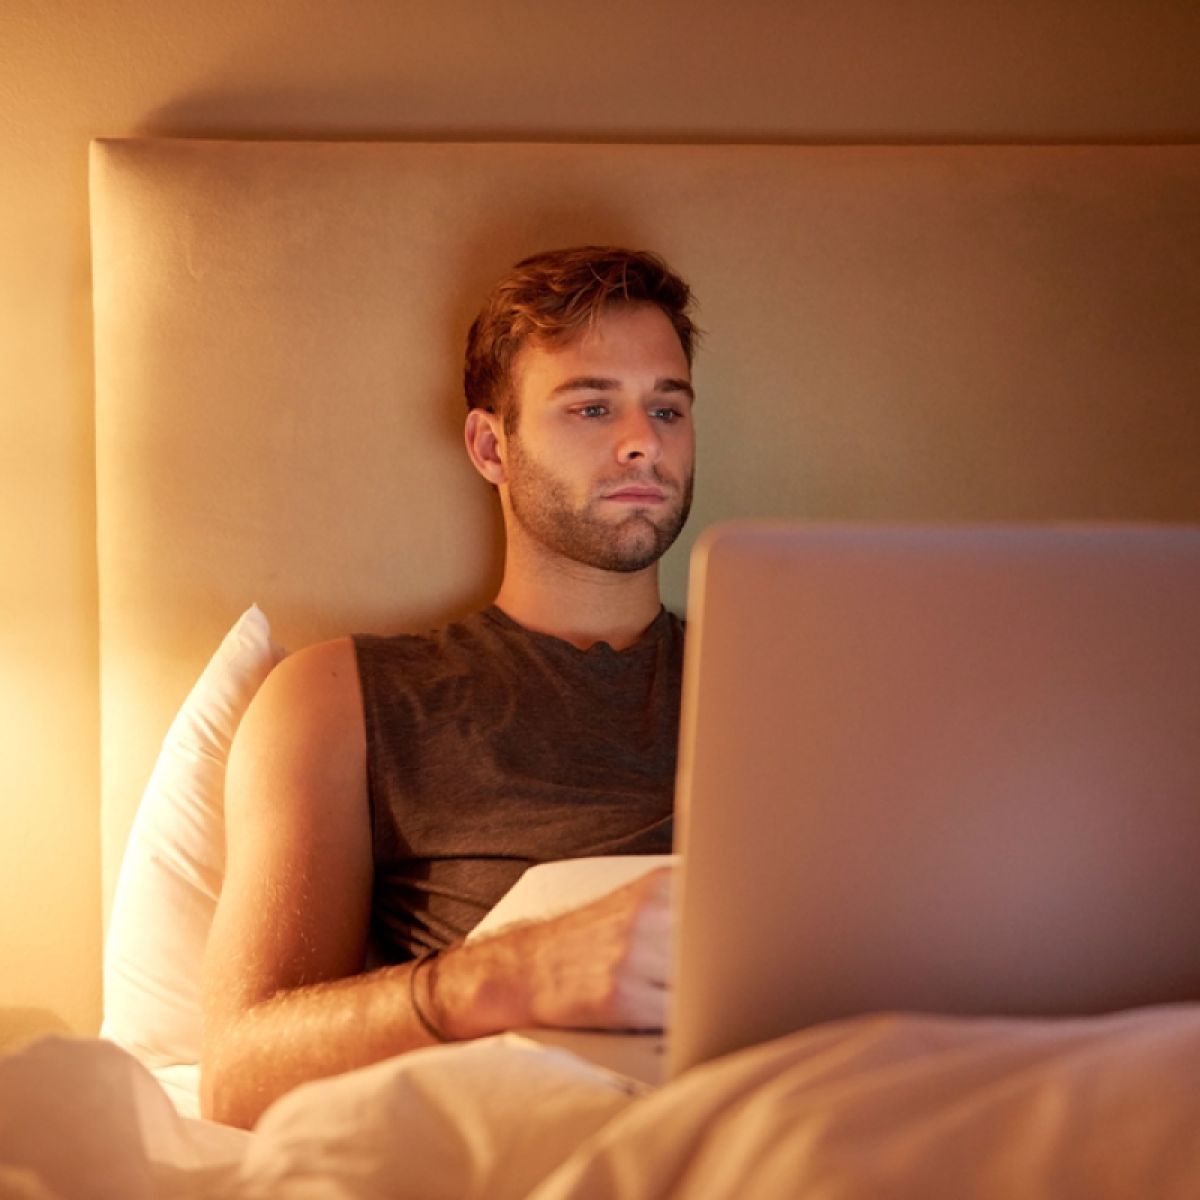 Study: This is how people who watch porn behave differently in a